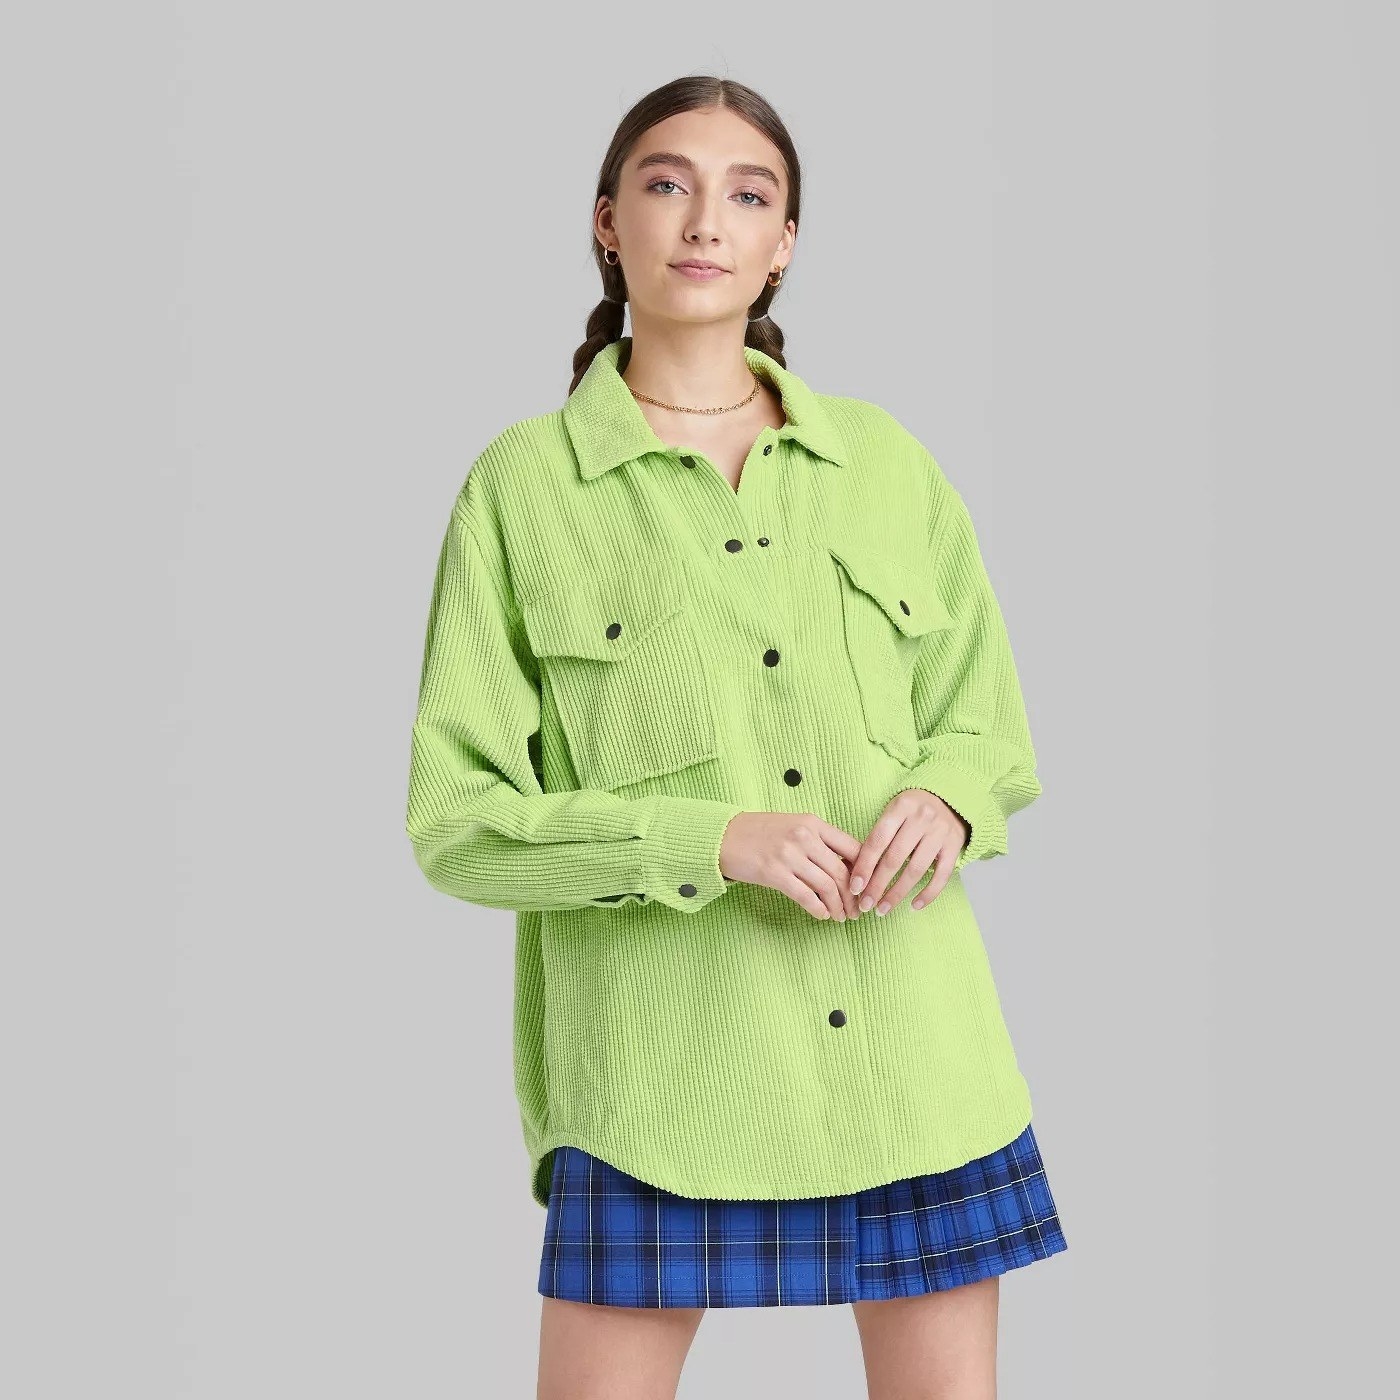 Model wearing neon cord jacket with black buttons